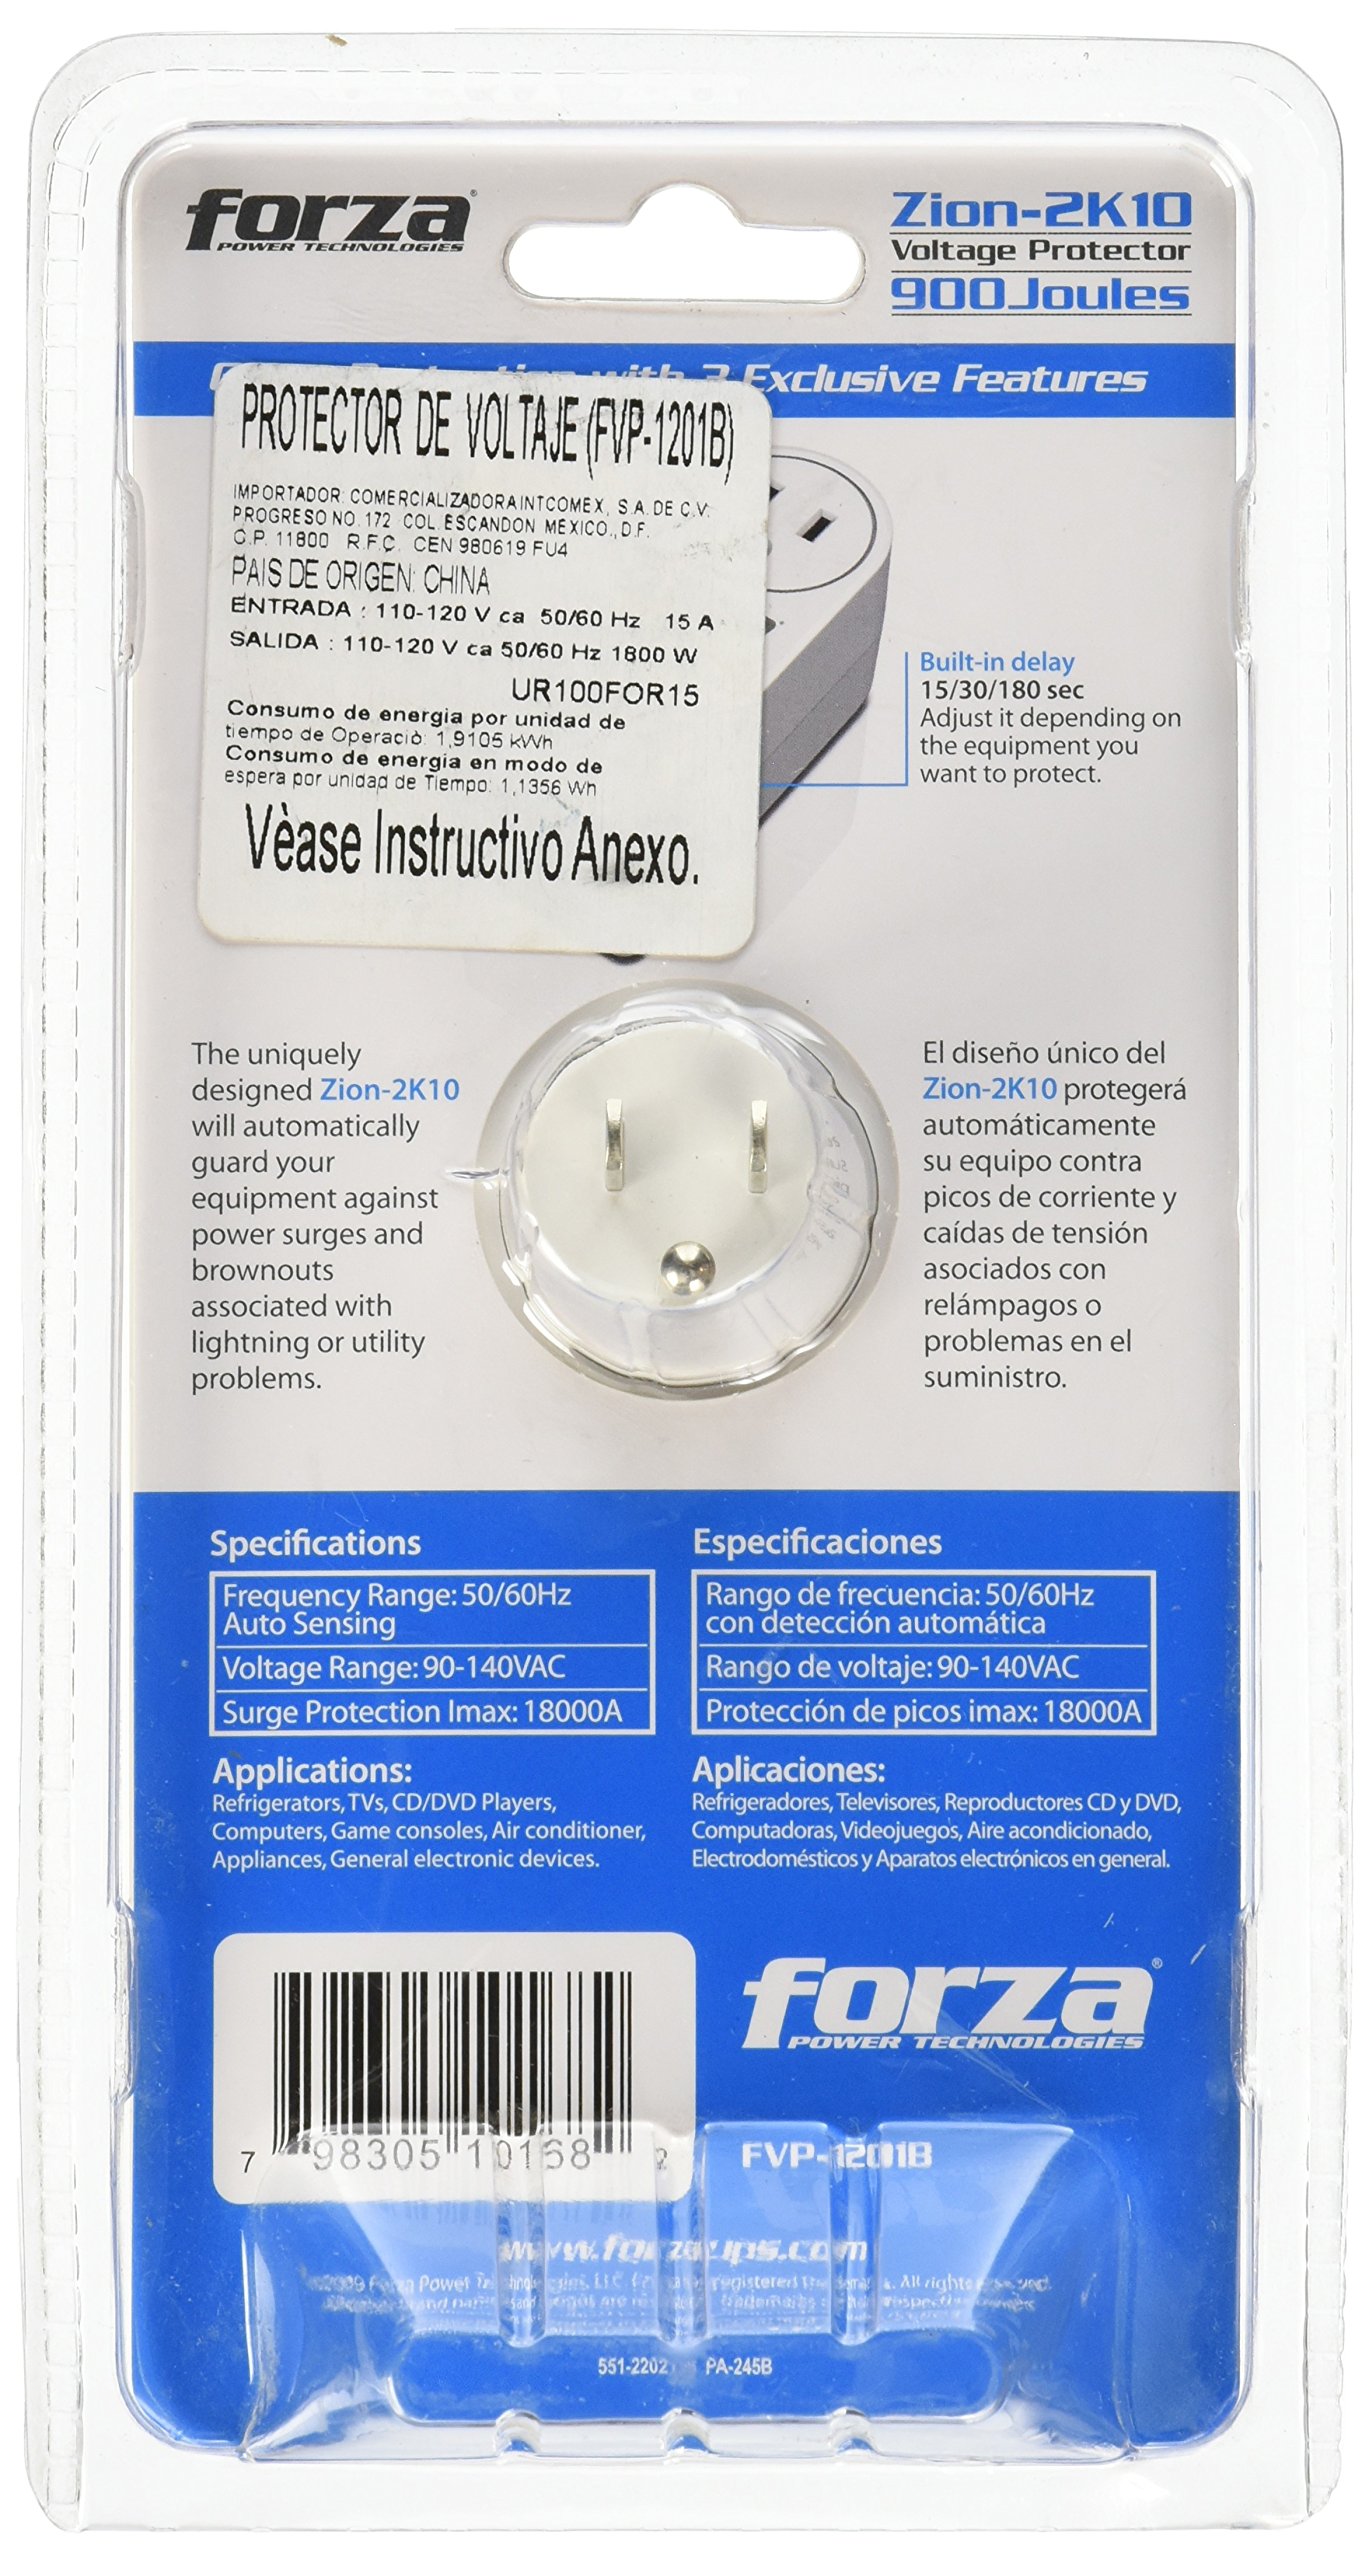 Forza- Voltage Protector- 18,000A Protector, 900 Joules, 350 Degree Rotation Function, 3 LED Indicators- Brownout Surge Plug